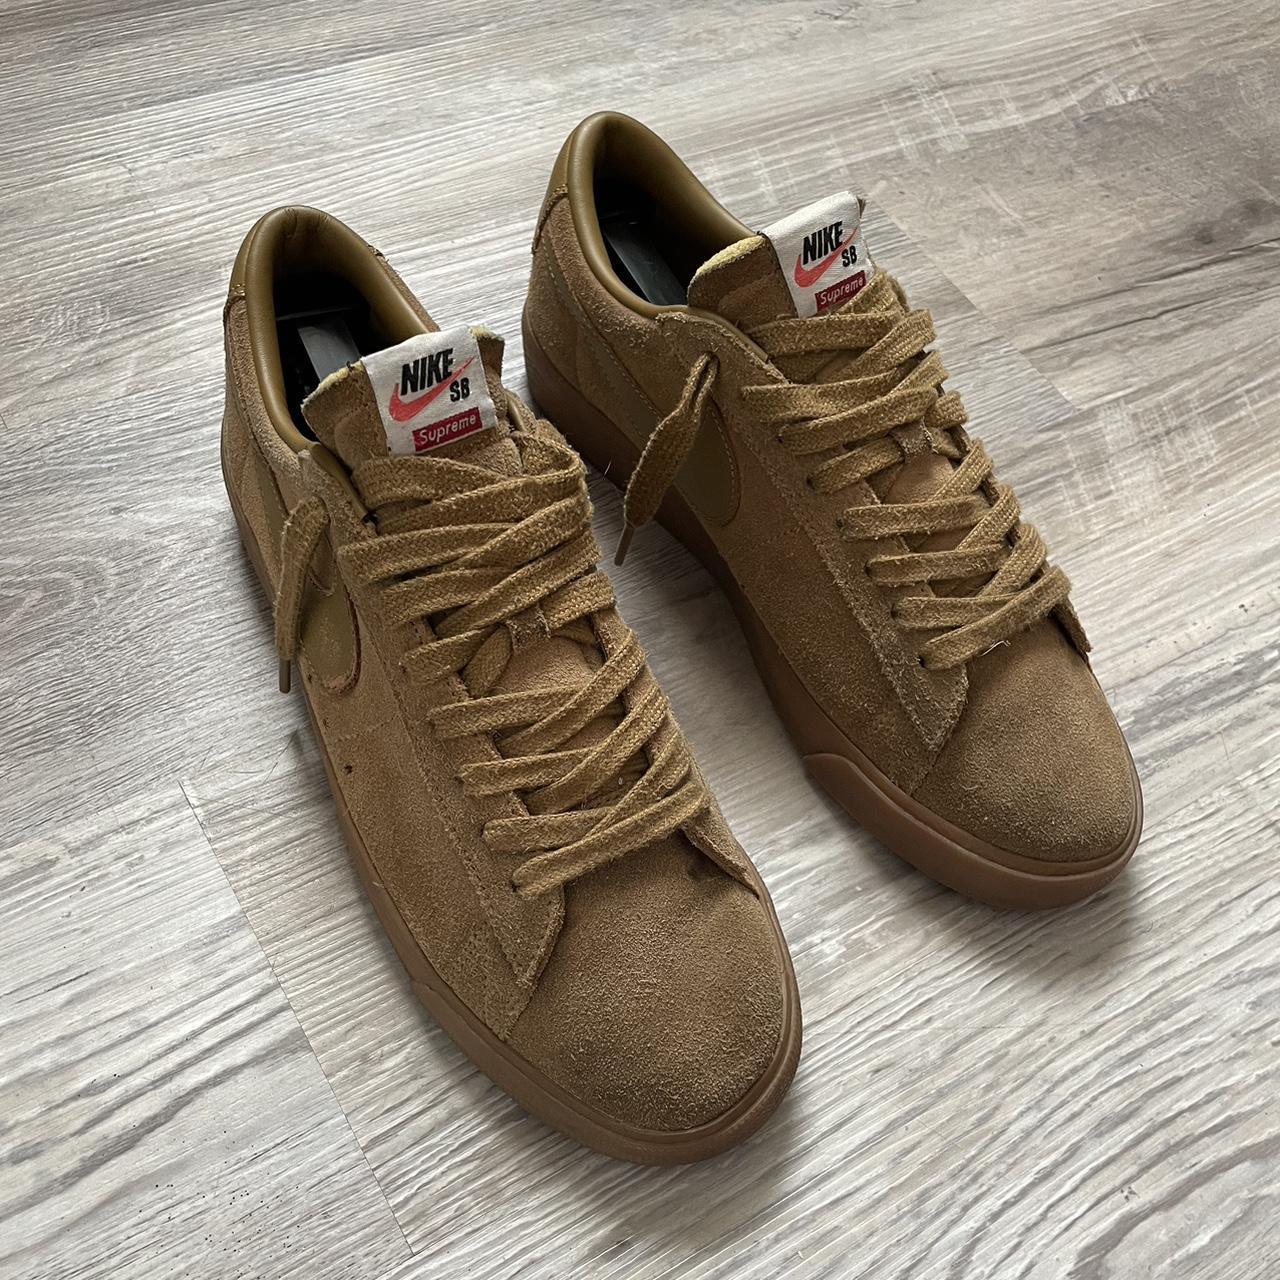 Supreme Men's Tan and Brown Trainers